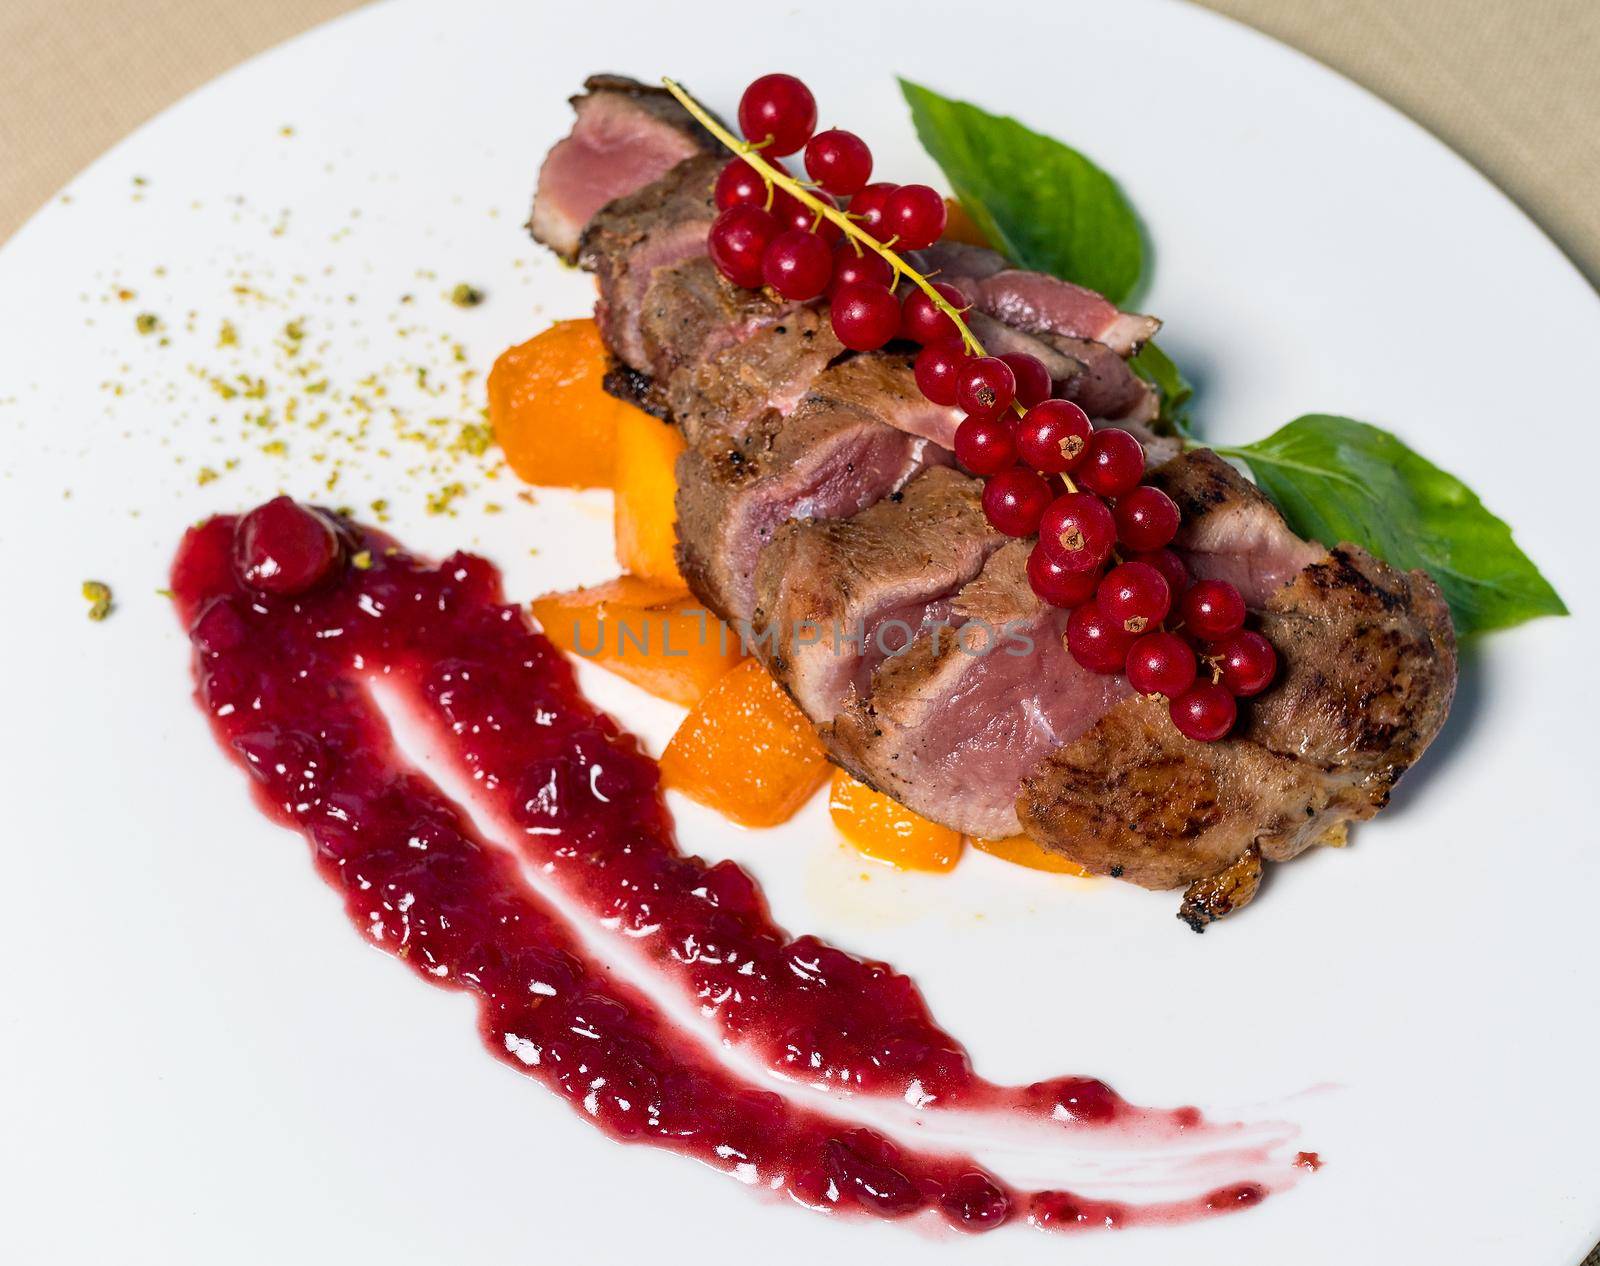 Cooked Steak with Lingonberry on it